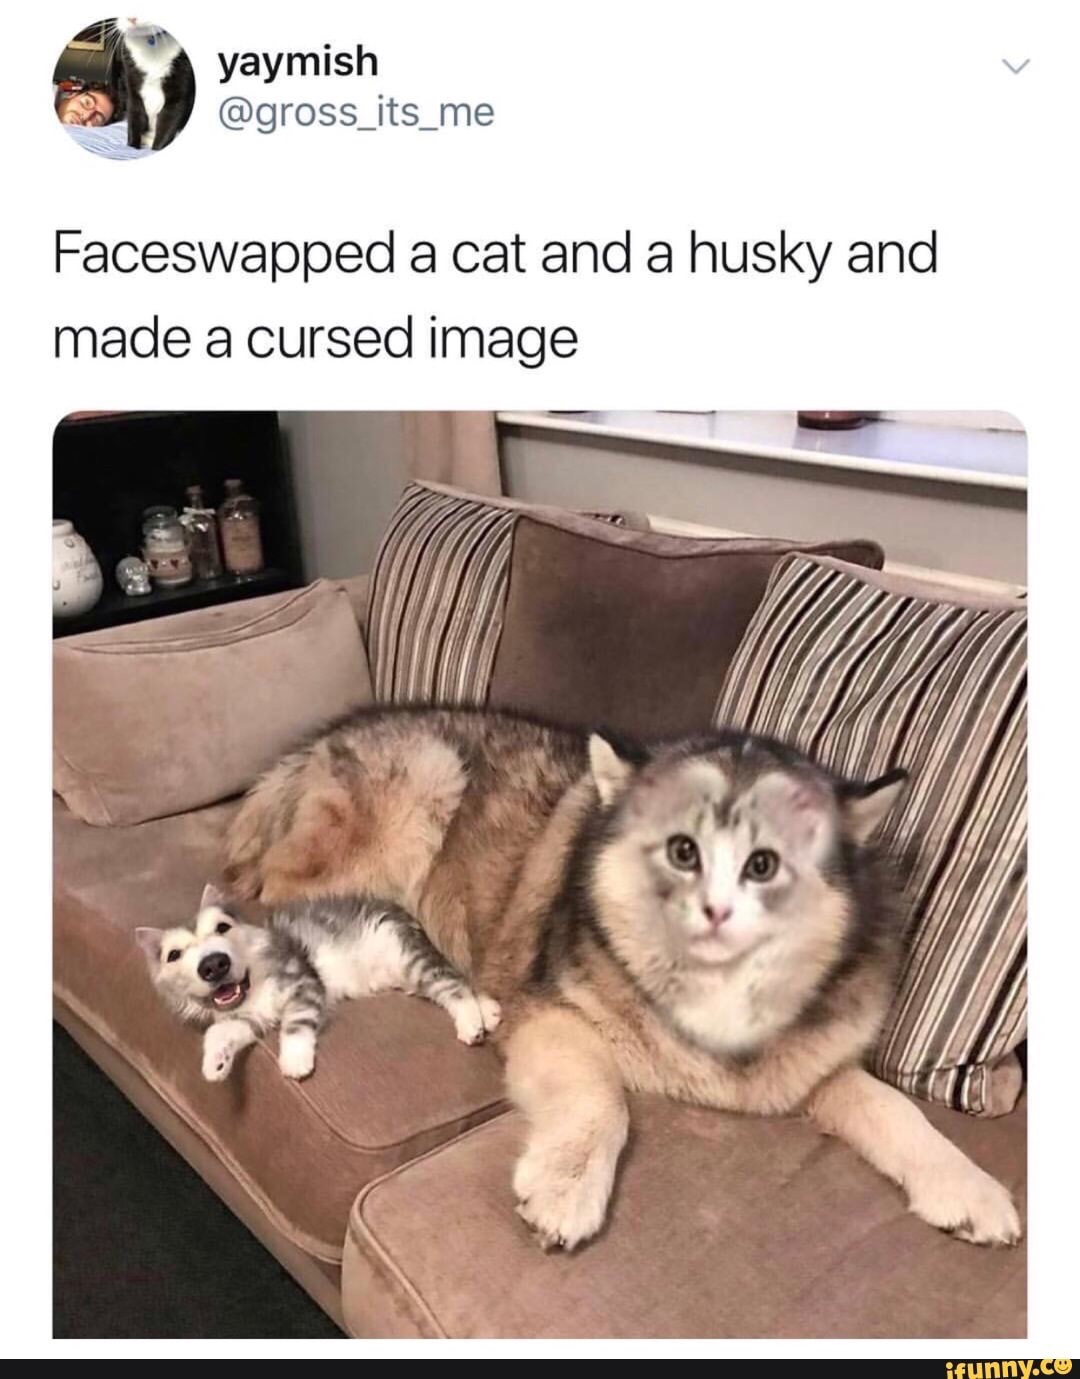 memes - cursed images funny - yaymish Faceswapped a cat and a husky and made a cursed image ifunny.co